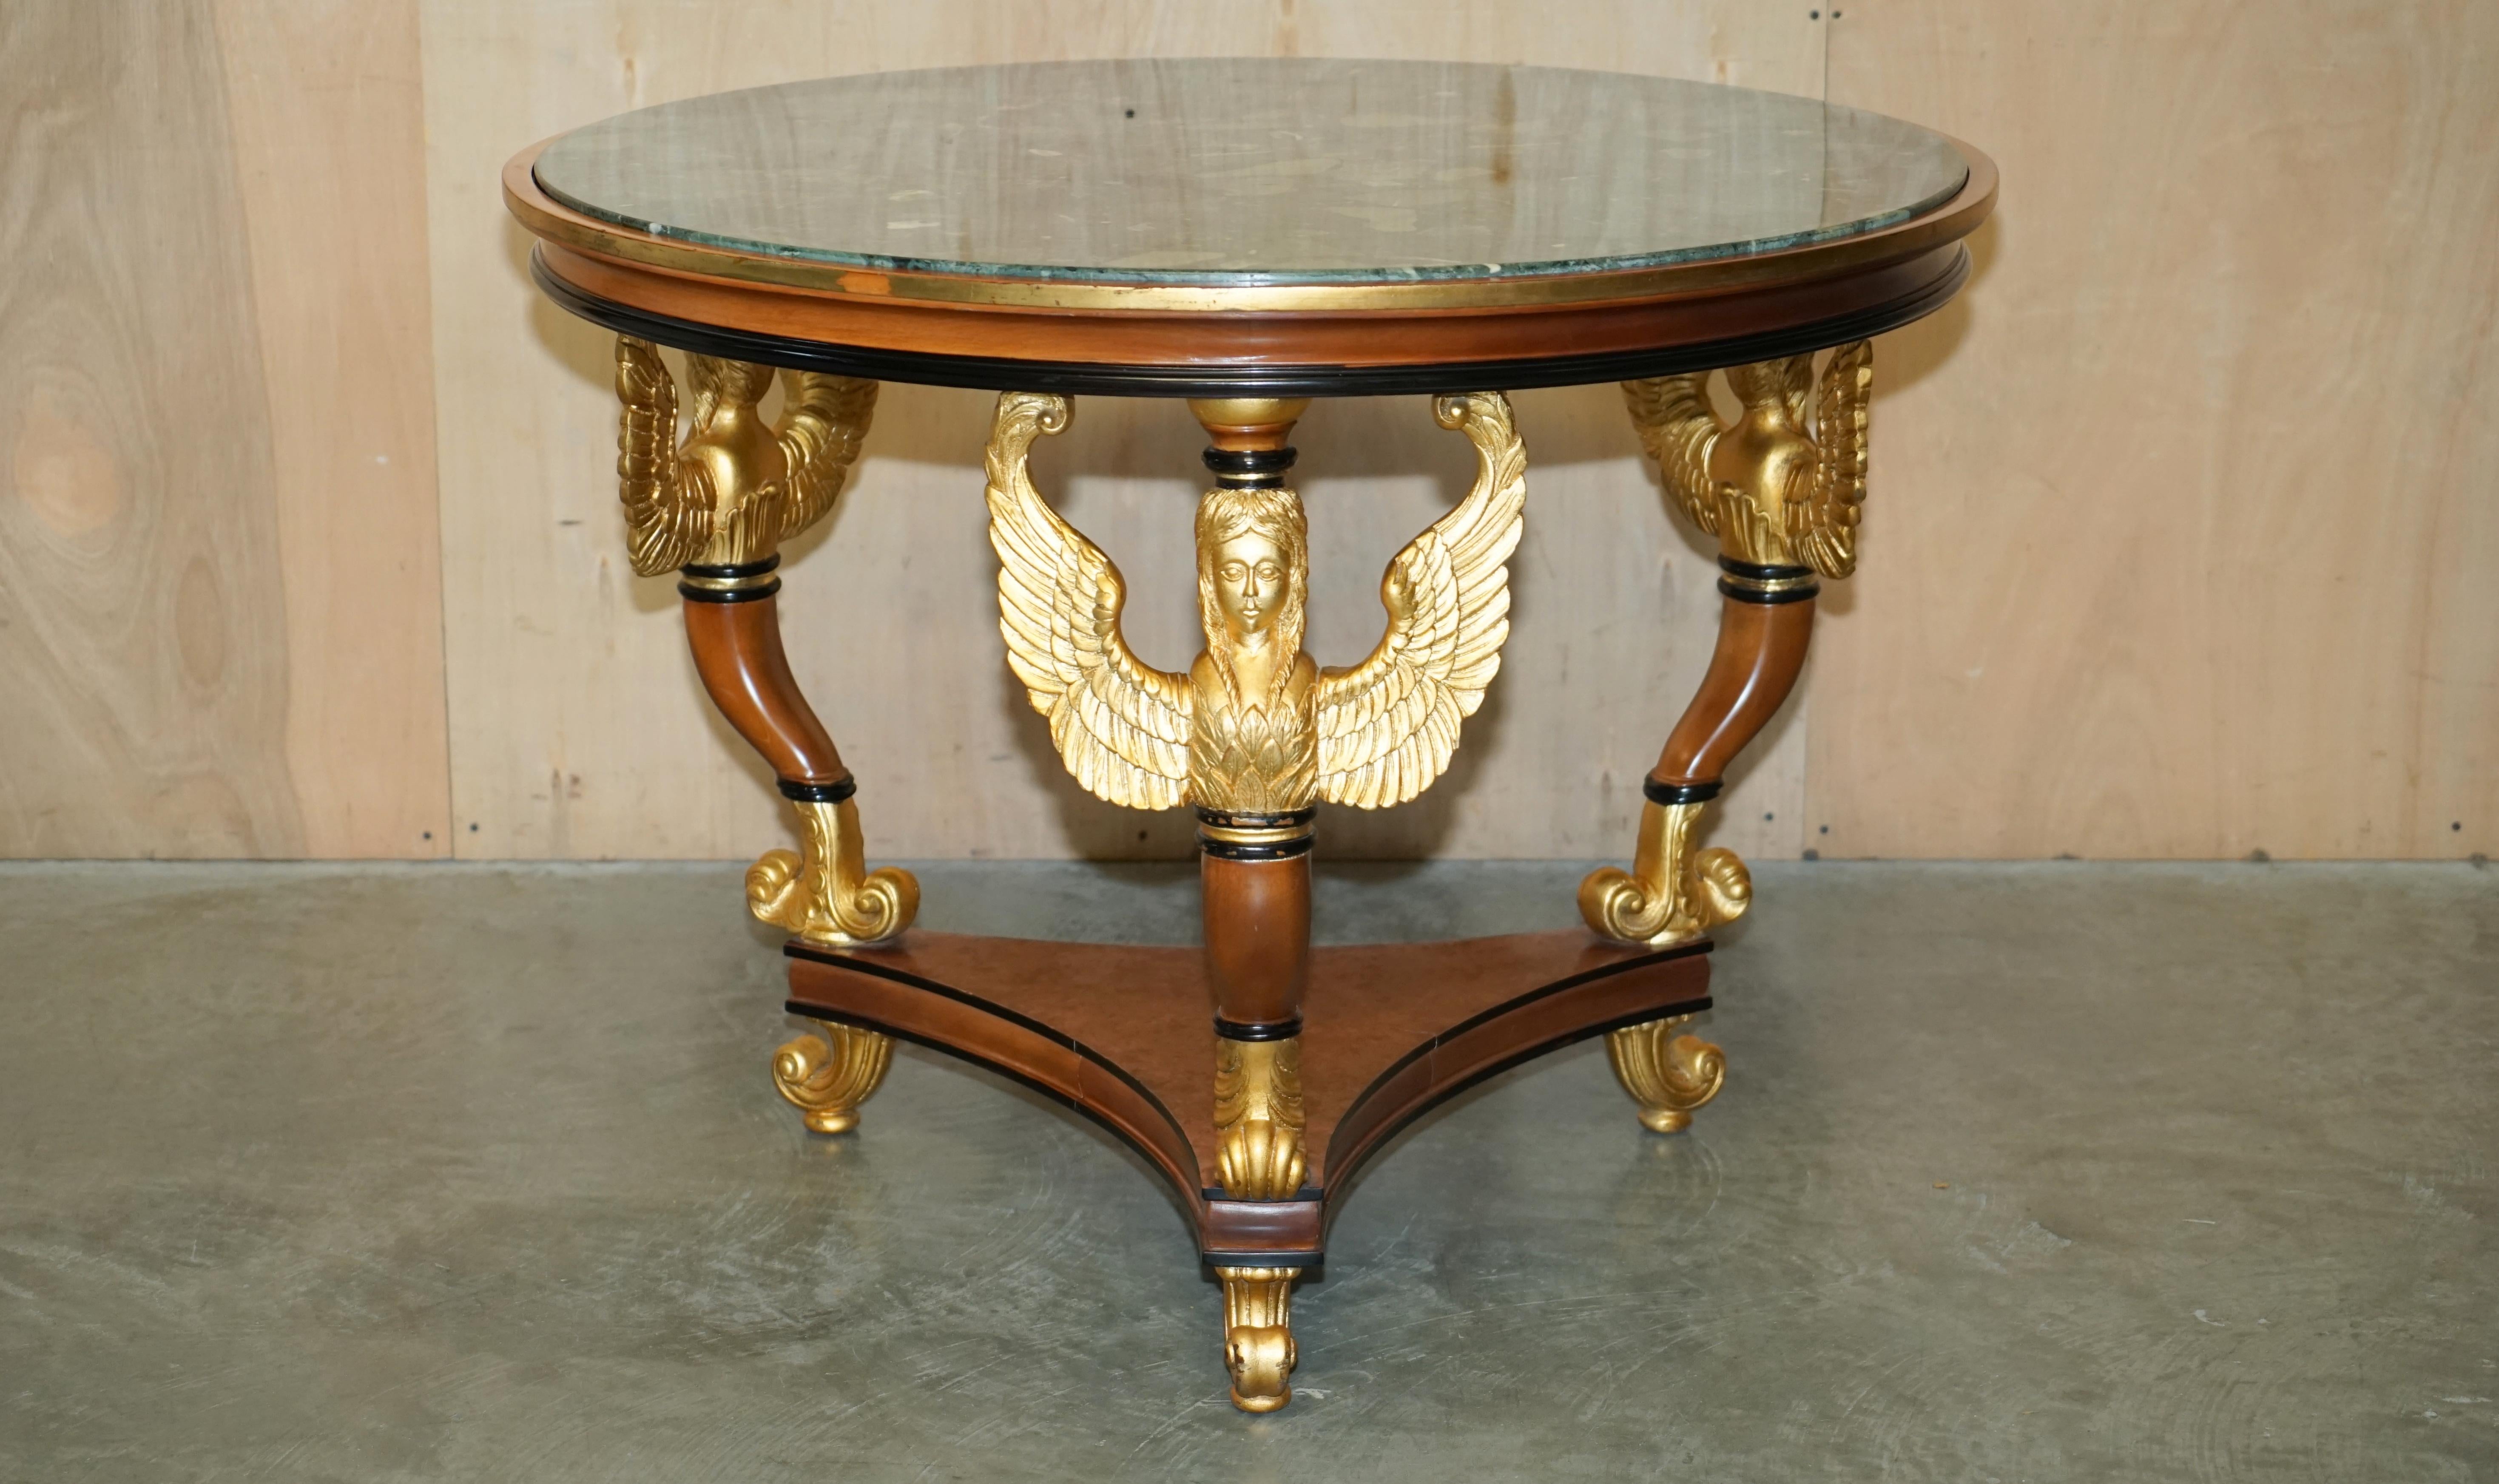 Royal House Antiques

Royal House Antiques is delighted to offer for sale this exquisite Egyptian Revival, gold Giltwood & Marble centre or occasional table 

Please note the delivery fee listed is just a guide, it covers within the M25 only for the